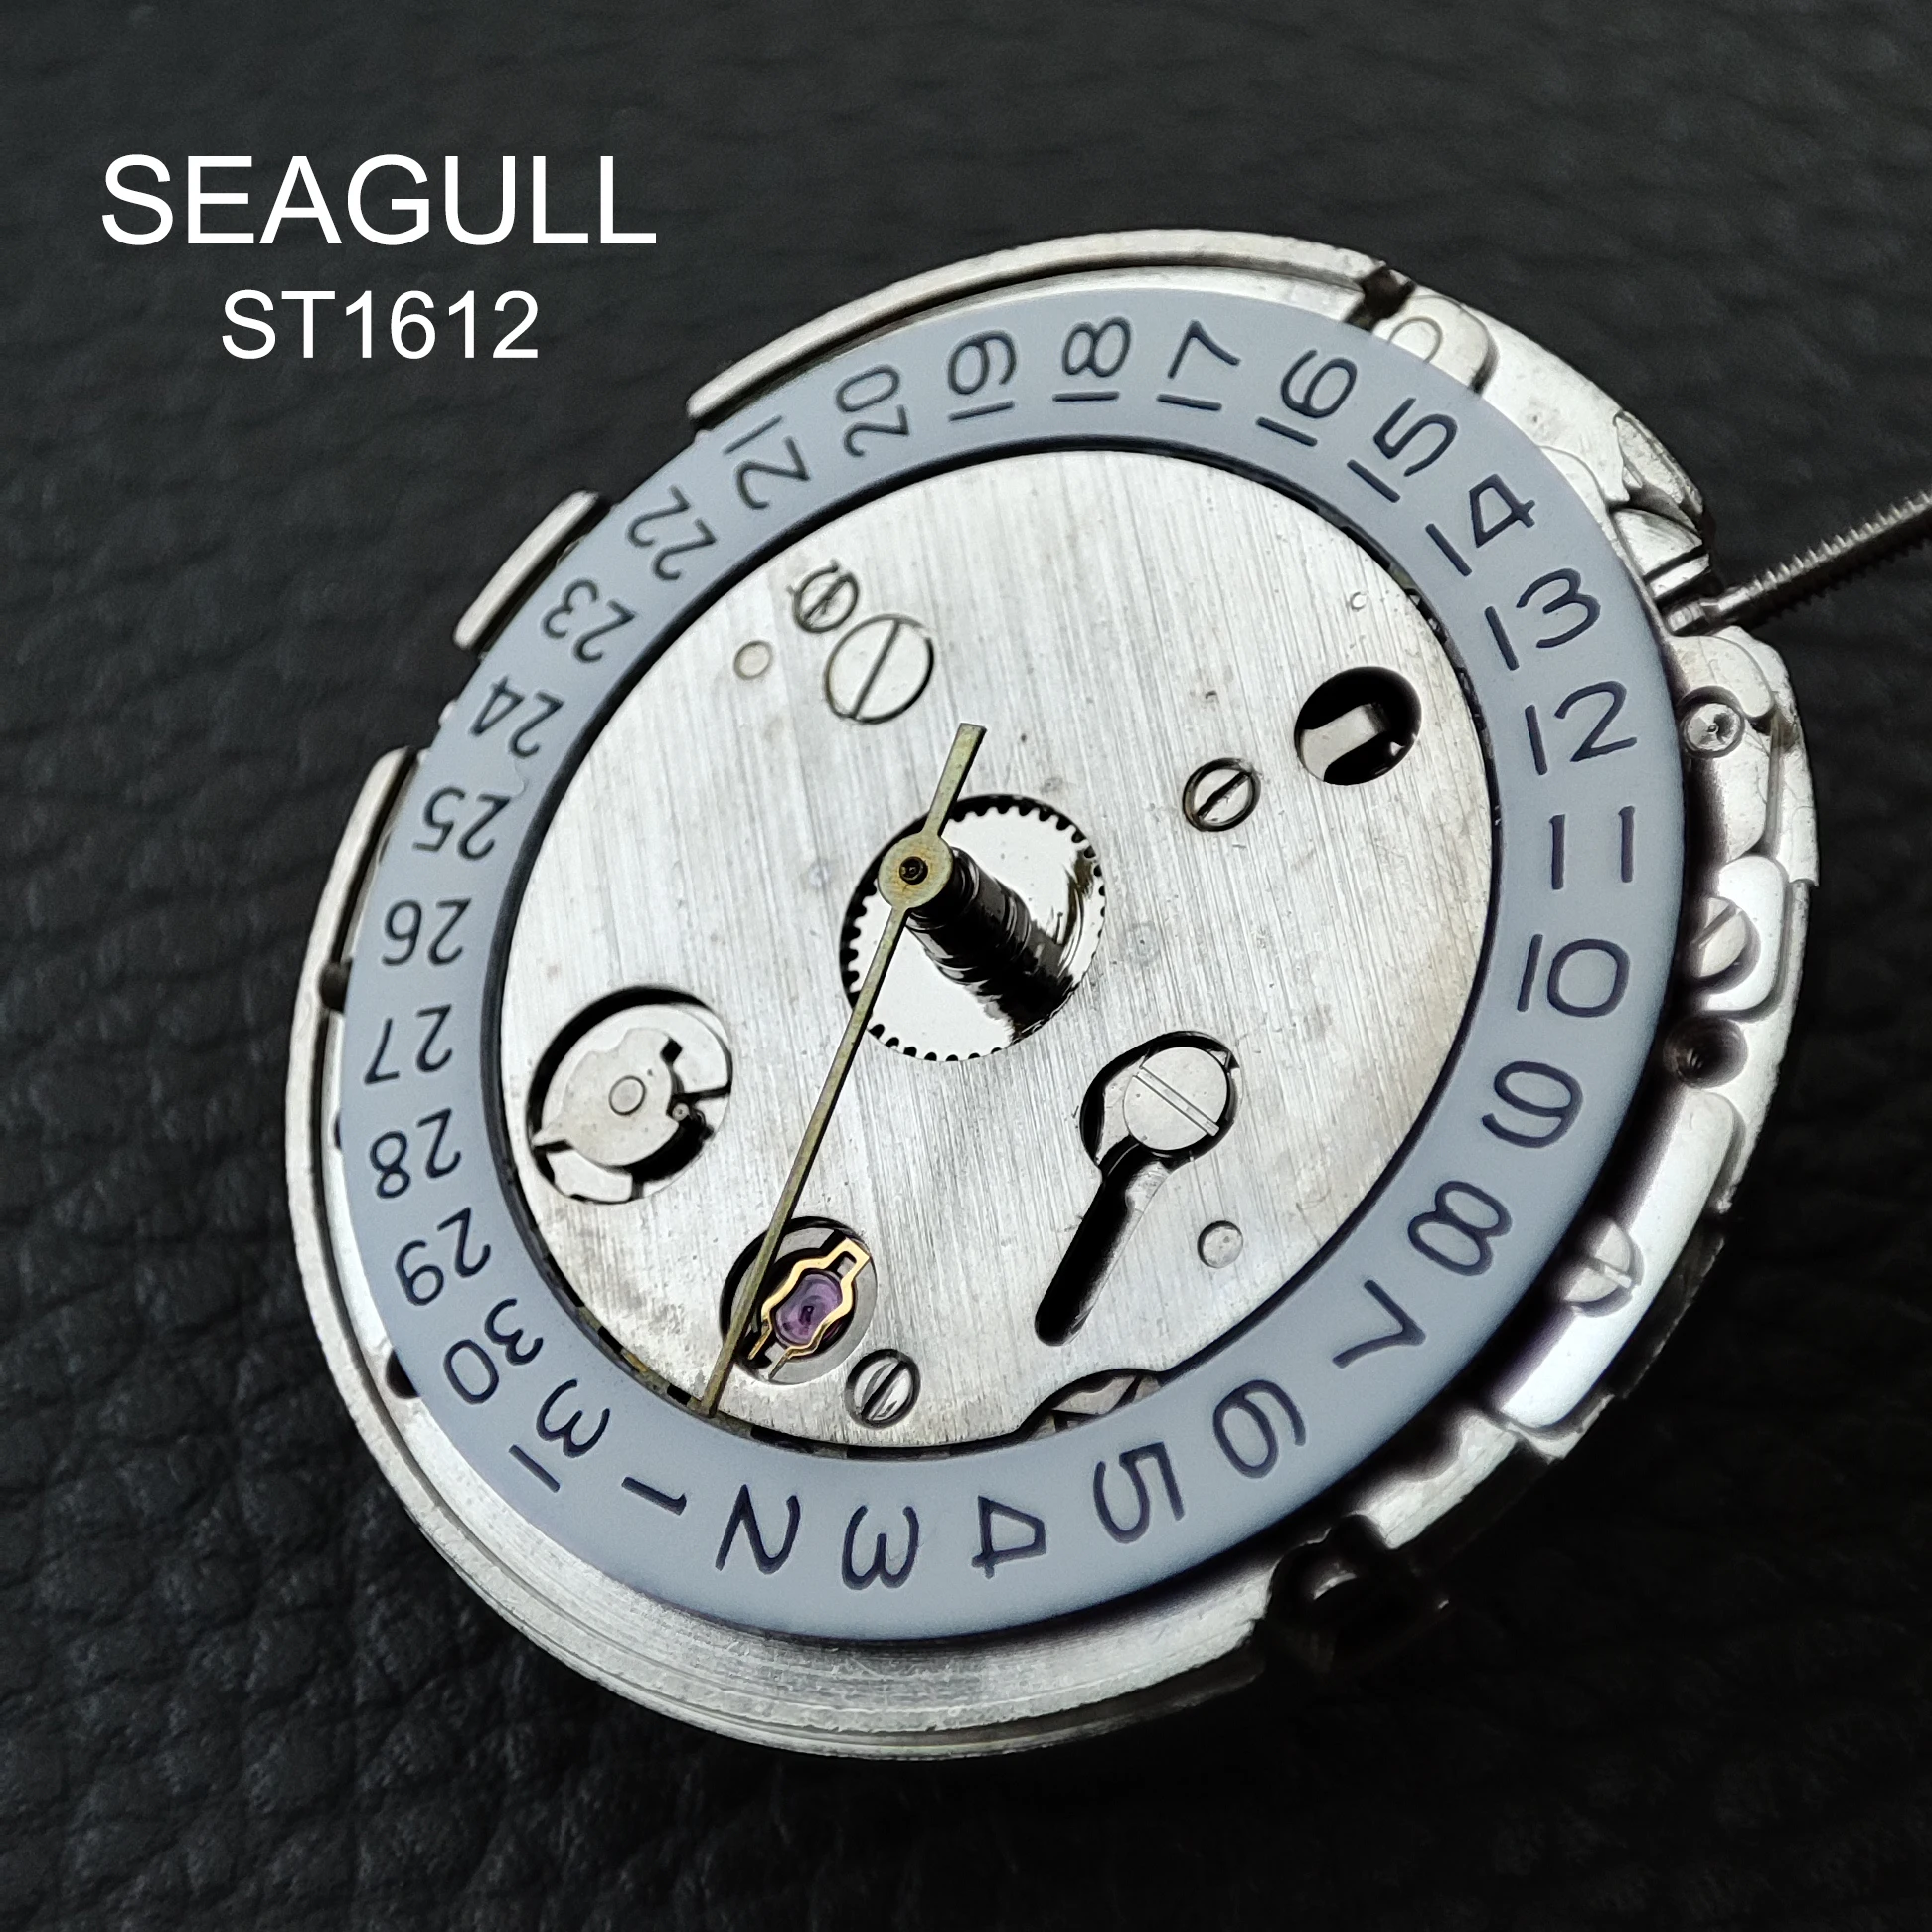 

Seagull ST1612 Genuine Automatic Movement Mechanical Watch Movement White Date 3H High Precision Watch Replacement Parts